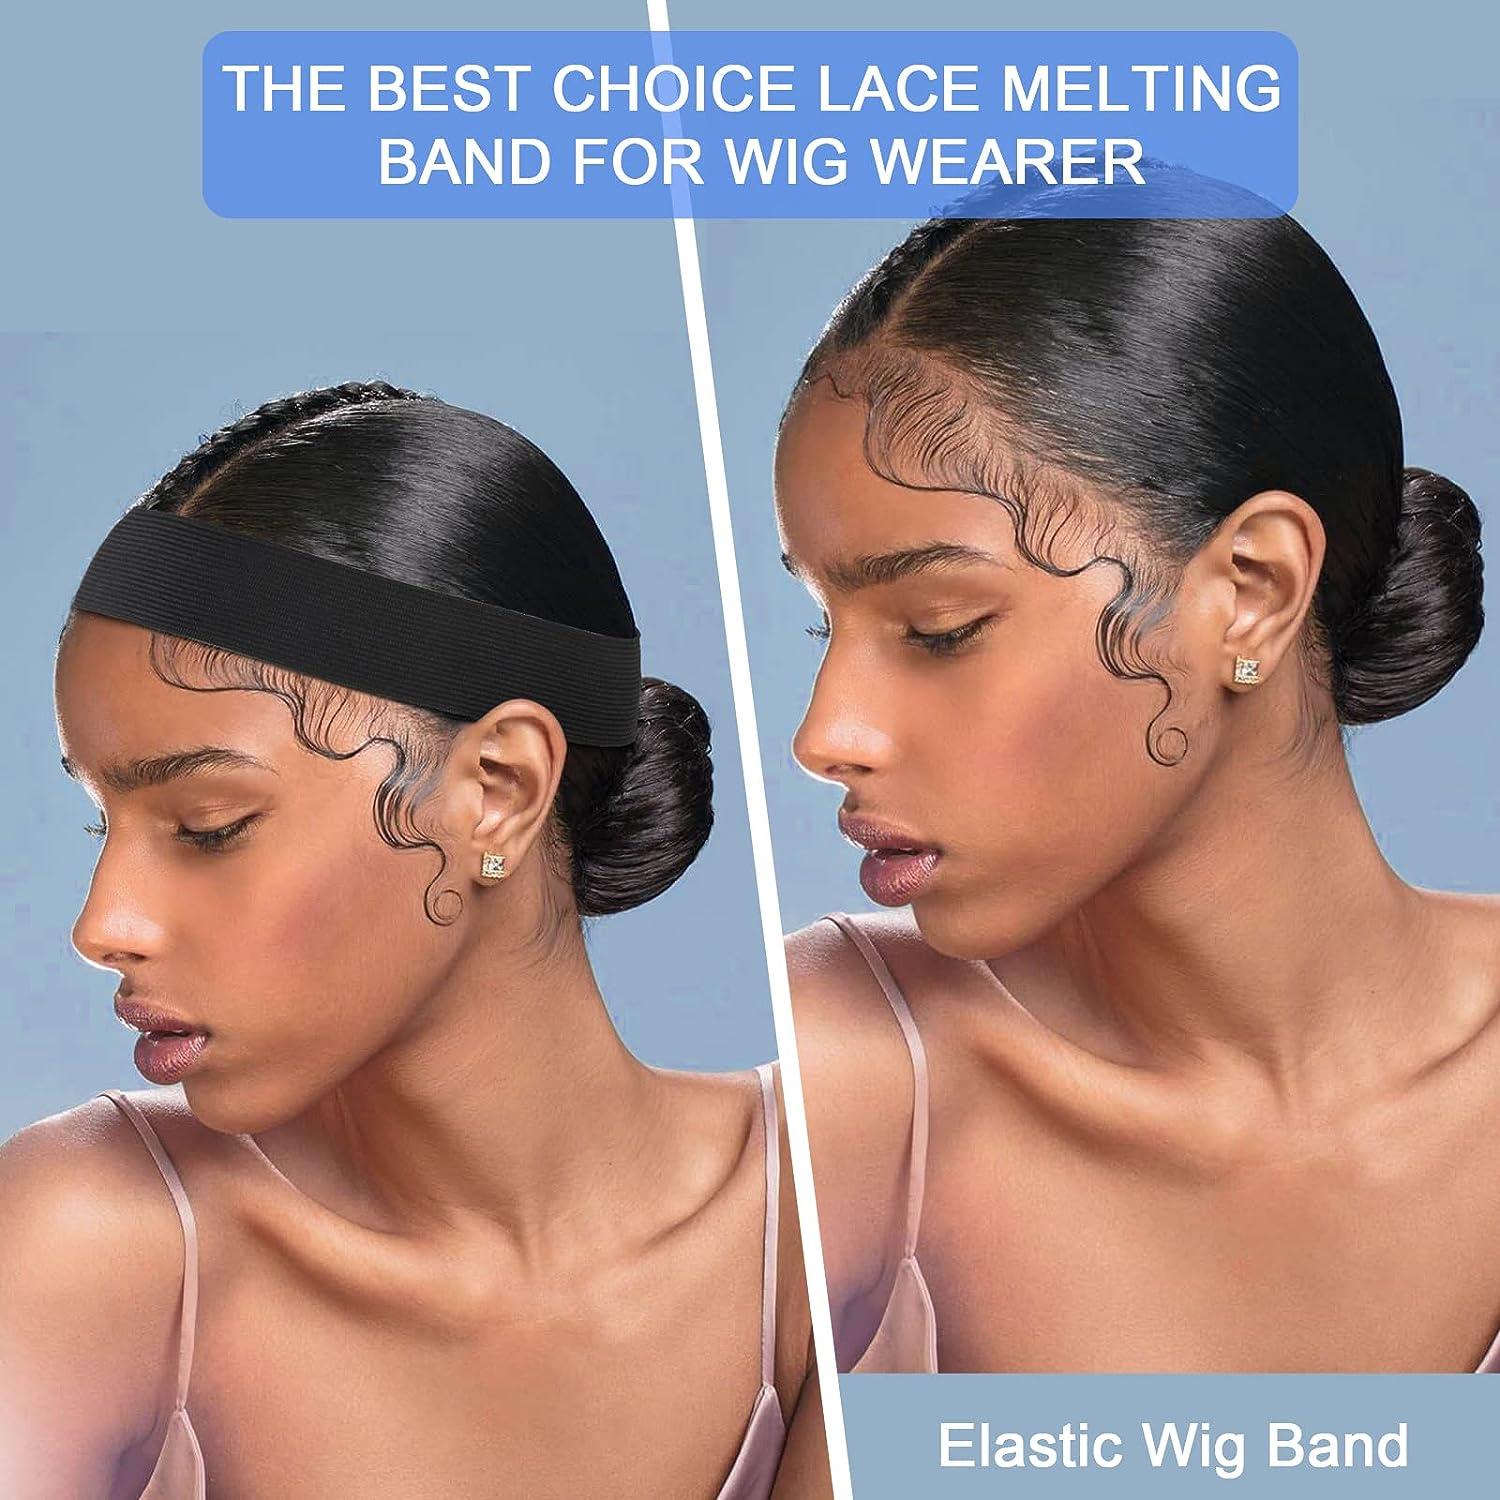 Elastic Band For Lace Frontal Melt, Lace Melting Band For Lace Wigs, Wig  Elastic Band For Melting Lace, Adjustable Wig Band For Edges, Lace Band Wig